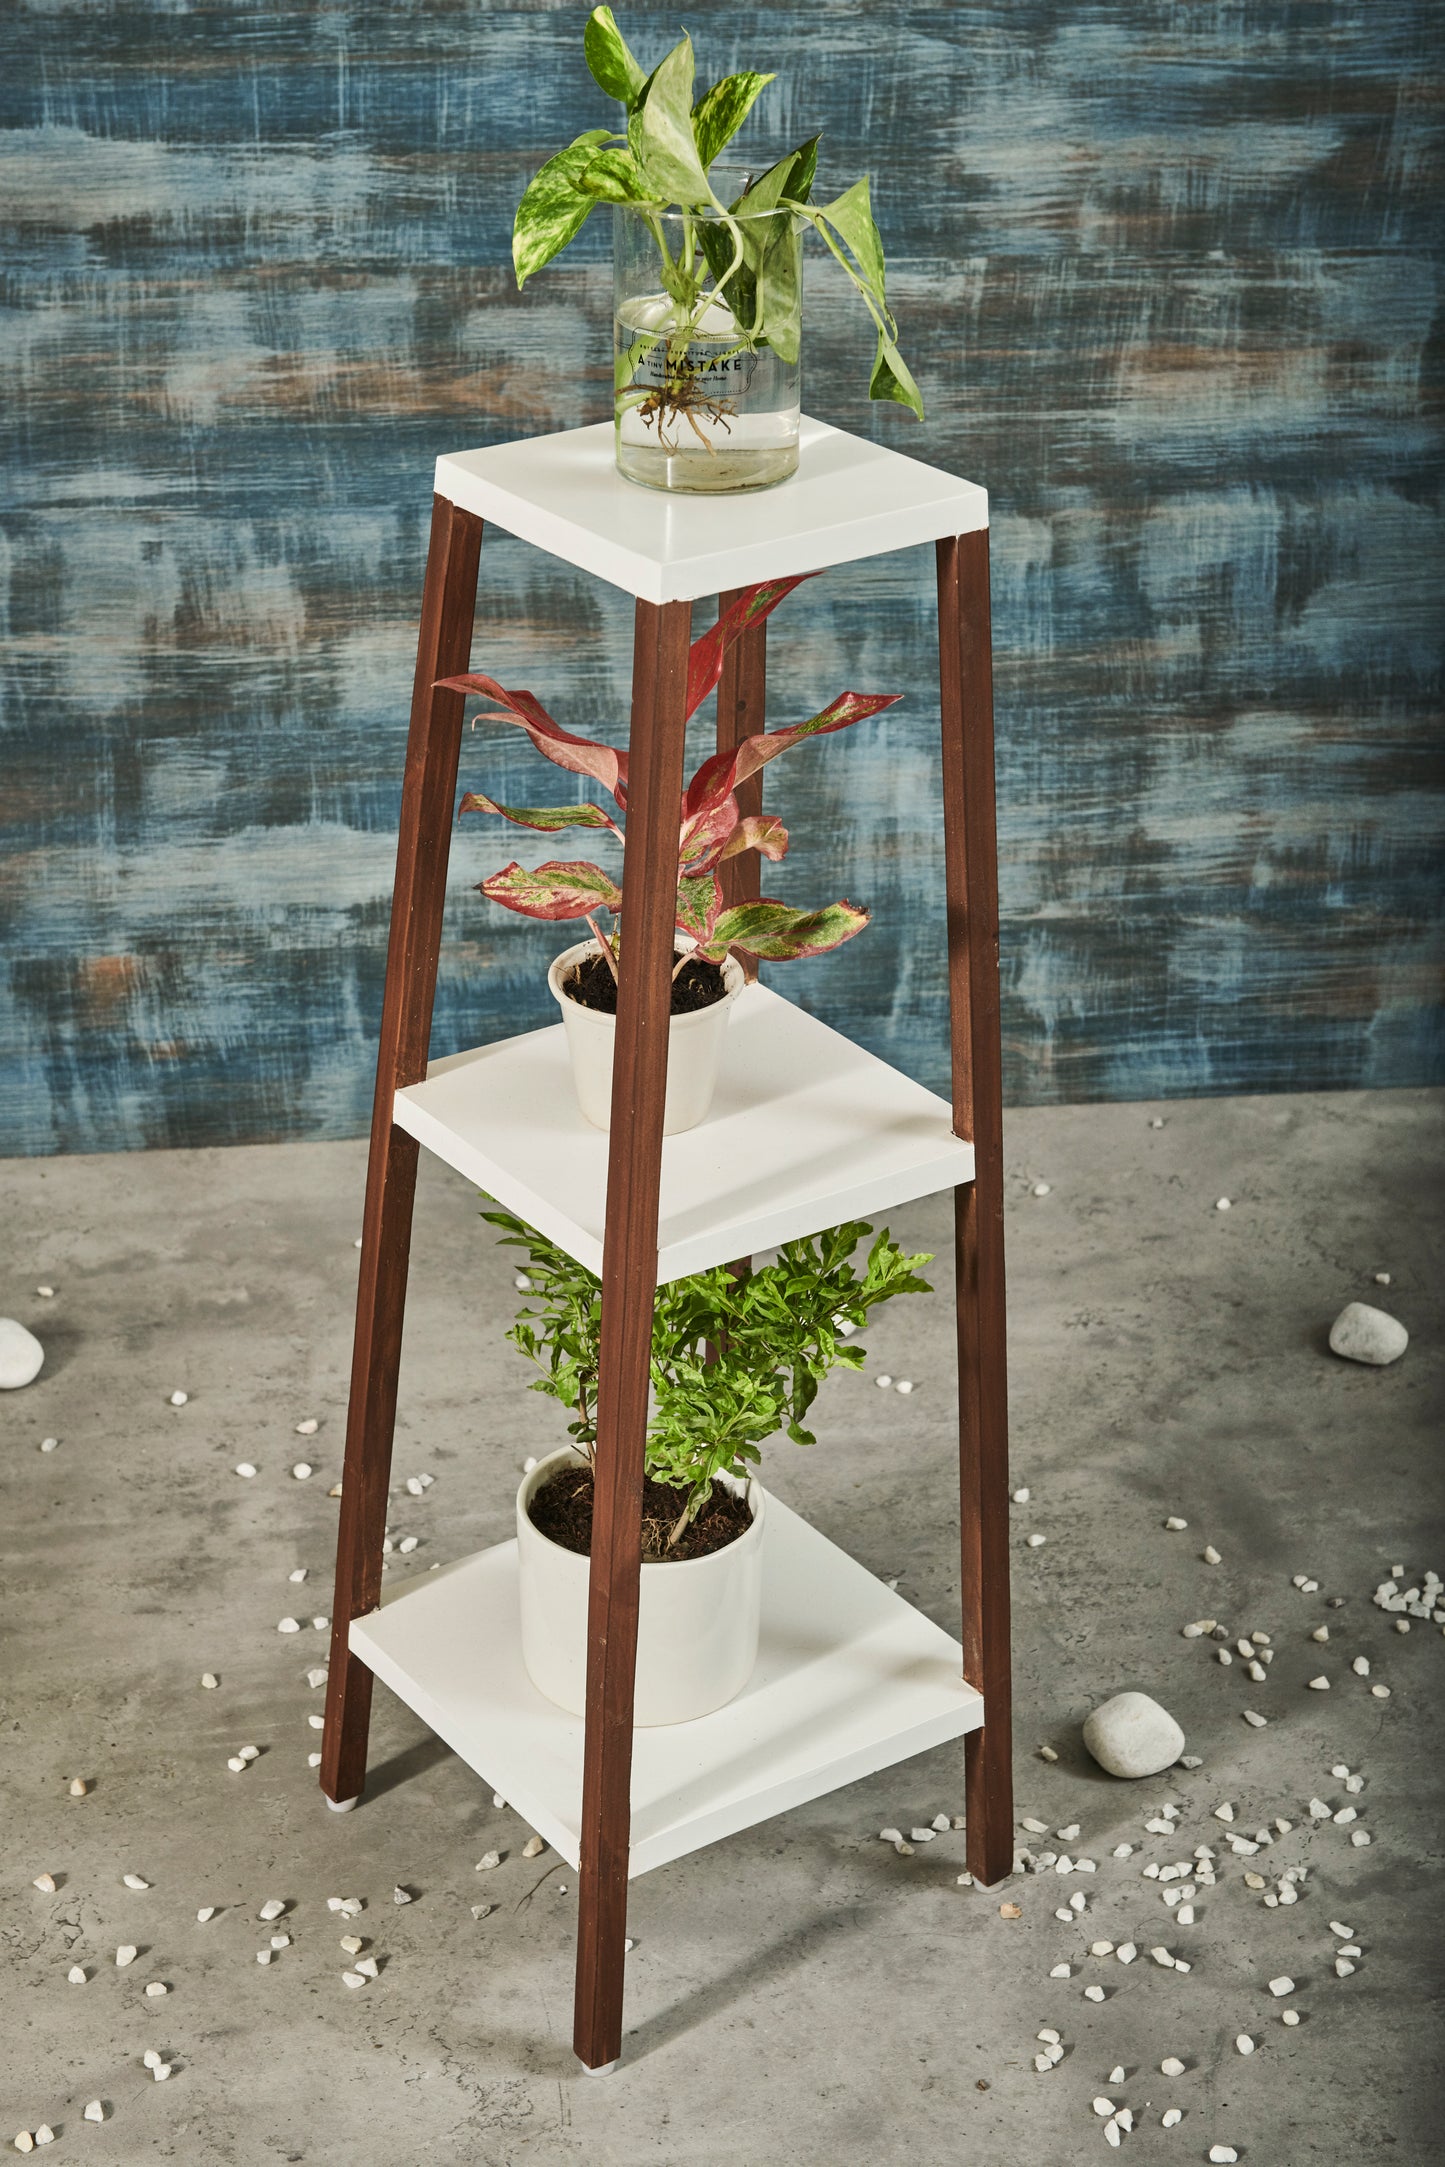 A Tiny Mistake Square Four Legged Tapering Three Tier Decorative Stand (Three Tiers) (White Base with Dark Legs)